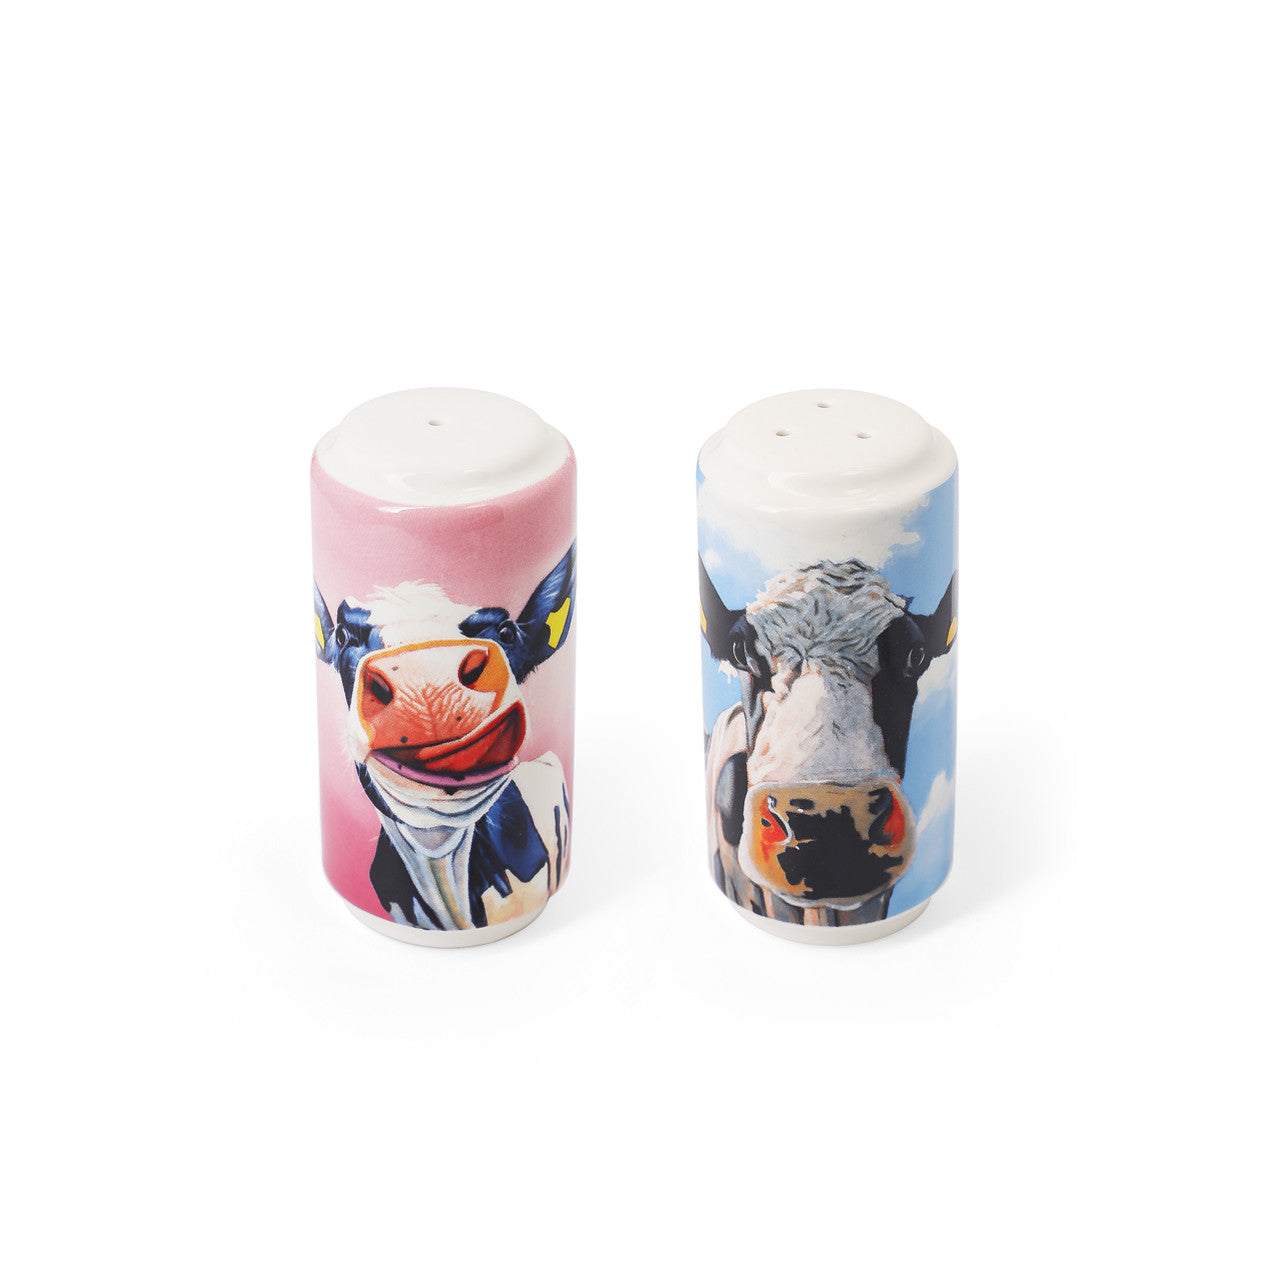 Tipperary Crystal Eoin O'Connor Cow Salt & Pepper NEW 2022!  EOIN O’CONNOR’S eclectic style and striking use of colour makes his work instantly recognisable.